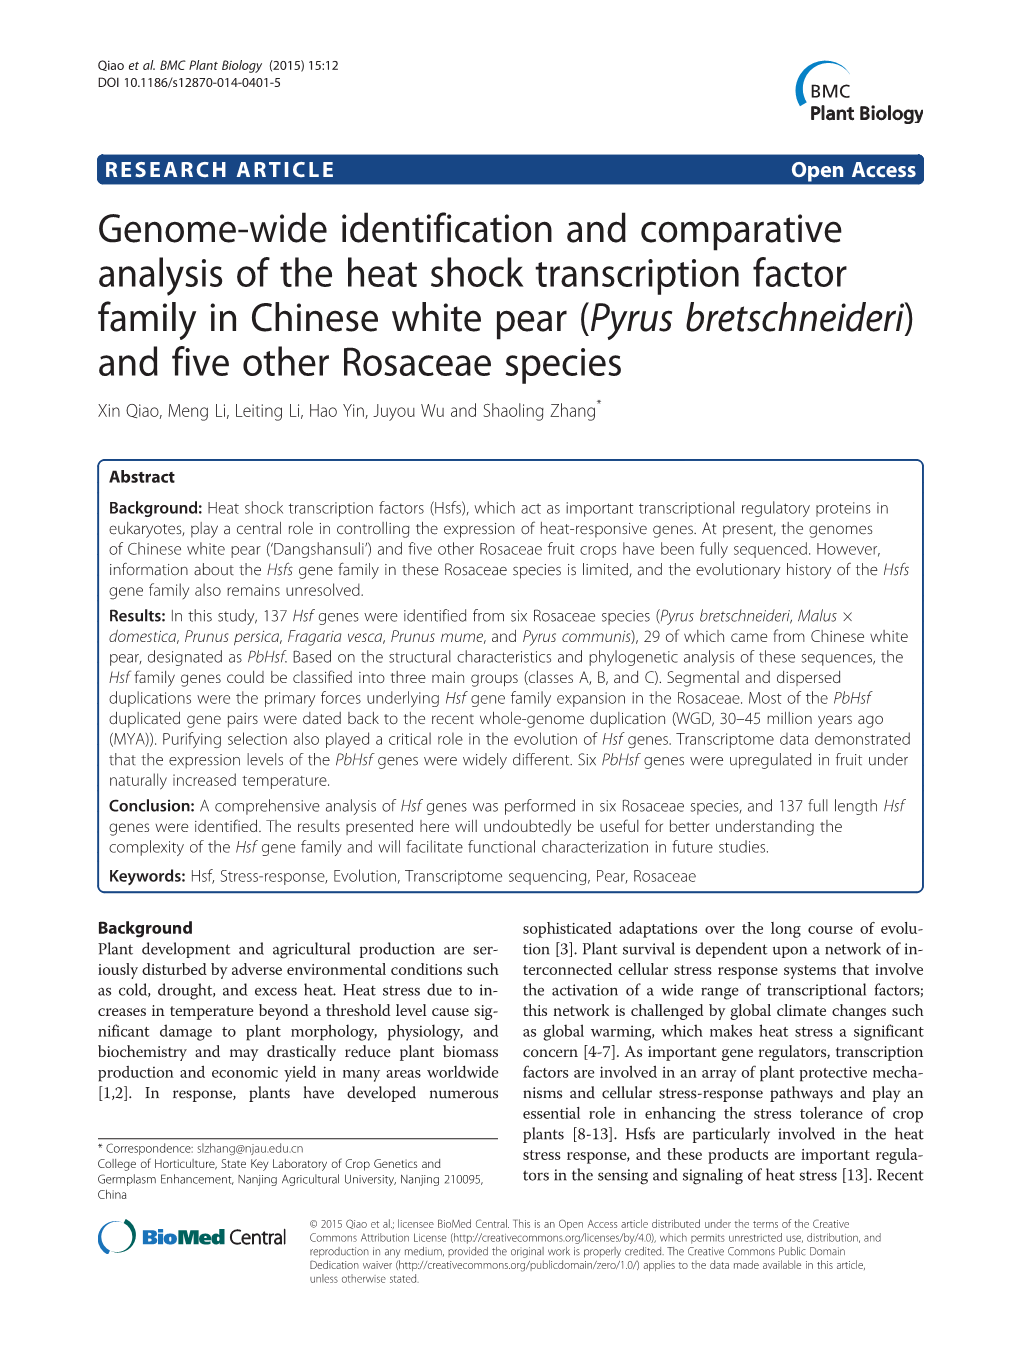 Genome-Wide Identification and Comparative Analysis of the Heat